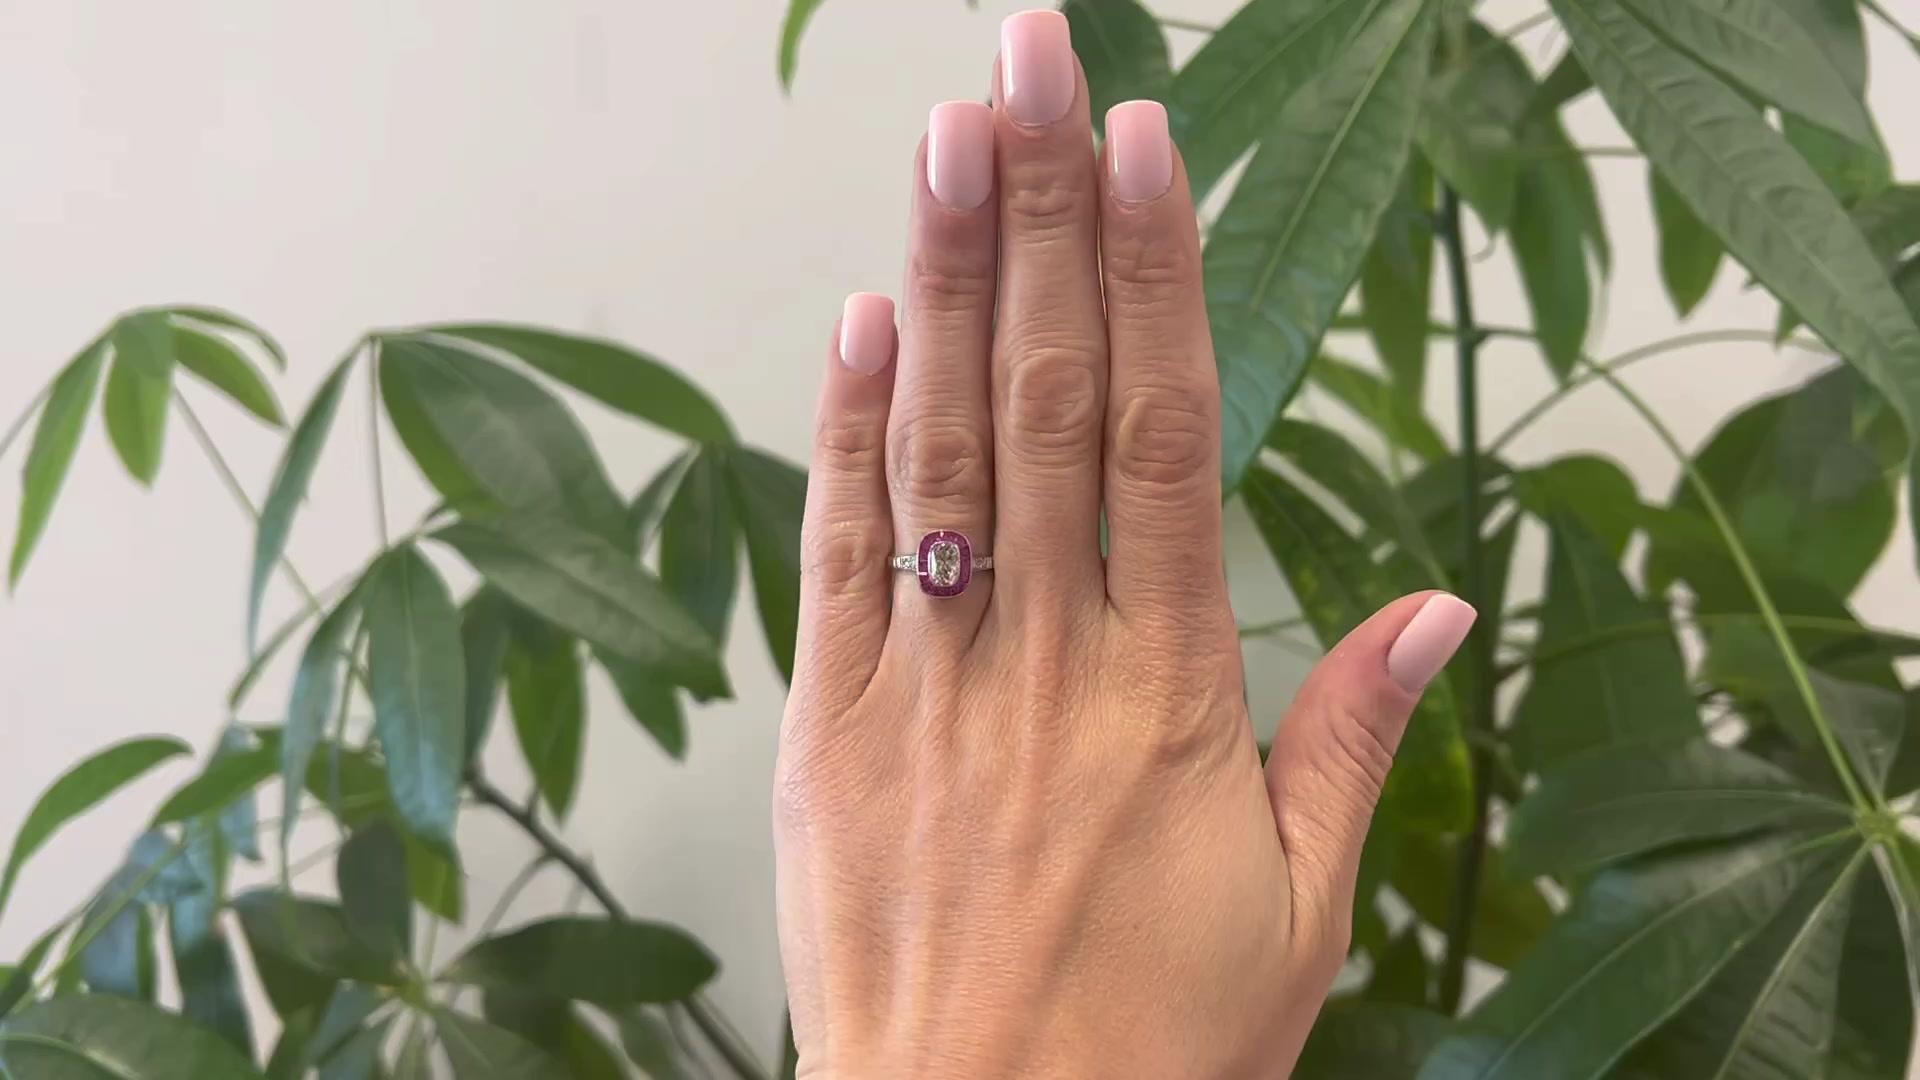 One Art Deco Inspired 0.84 Carat Old Mine Cut and Ruby Platinum Ring. Featuring one elongated old mine cut diamond of 0.84 carat, graded L color, VS2 clarity. Accented by 16 calibré cut rubies with a total weight of approximately 1.50 carats, and